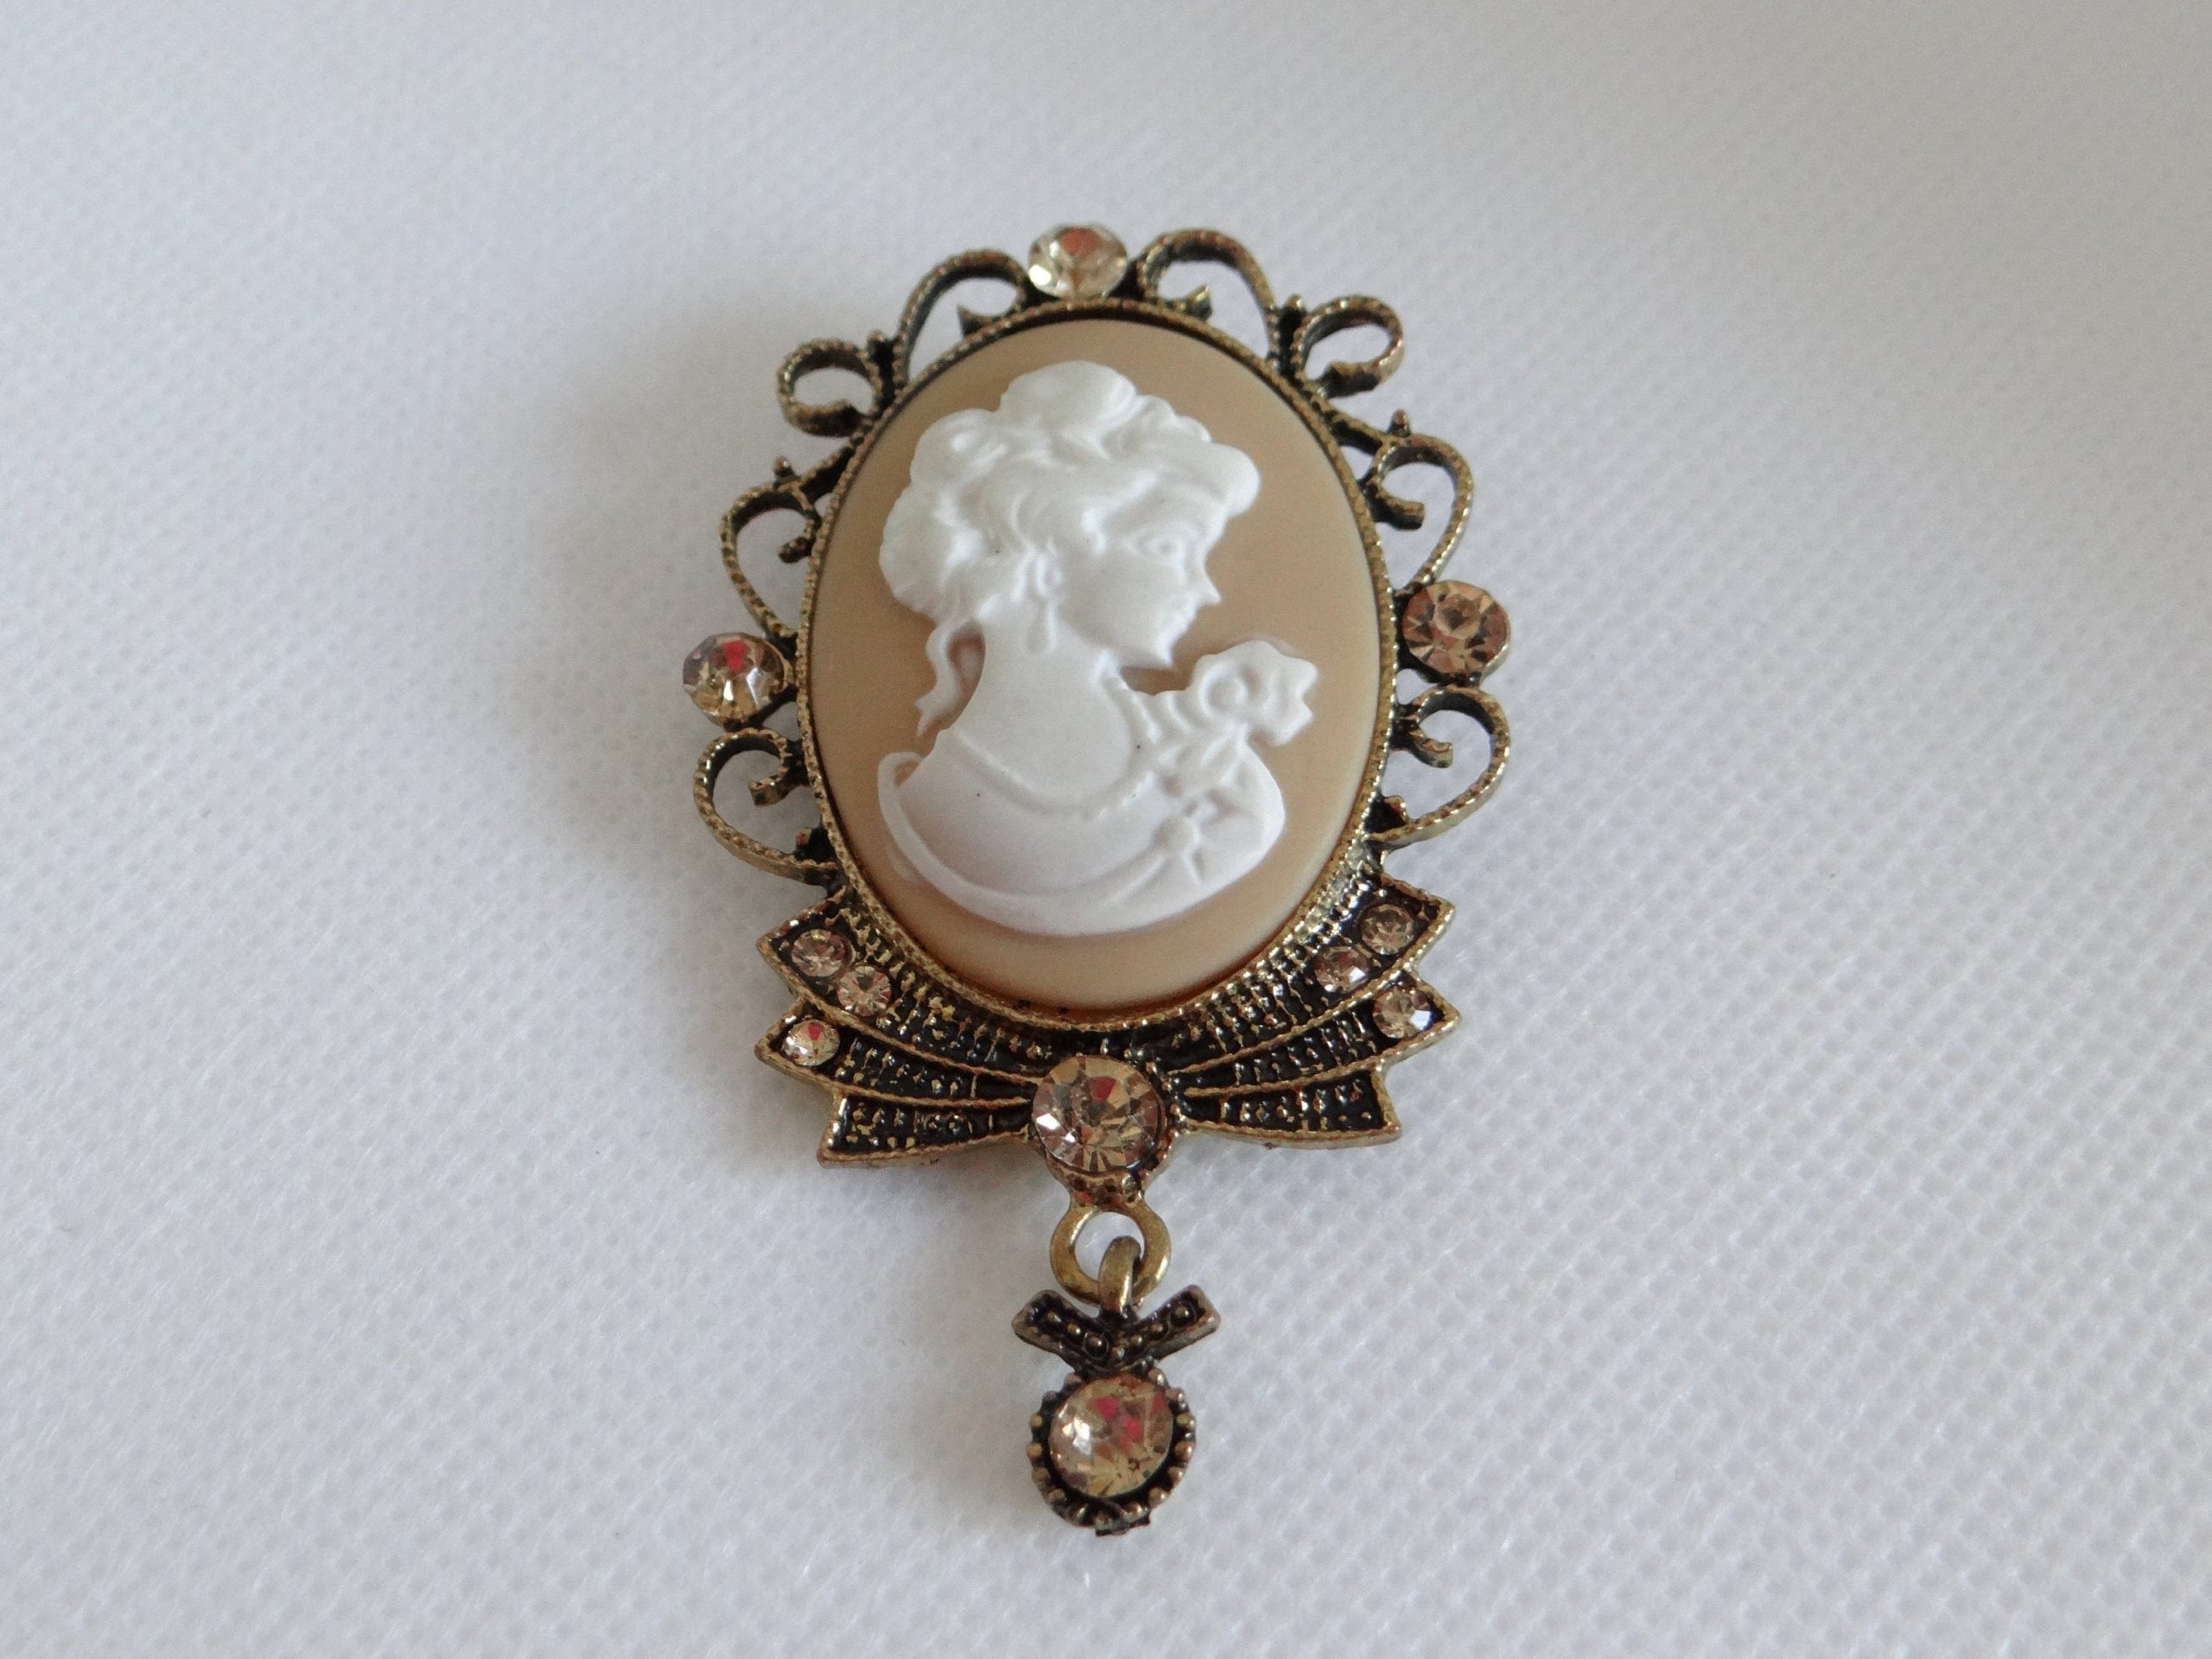 Victorian cameo brooch, Amber portrait, Reproduction pin, Second Wind Vintage, 2560x1920 HD Desktop